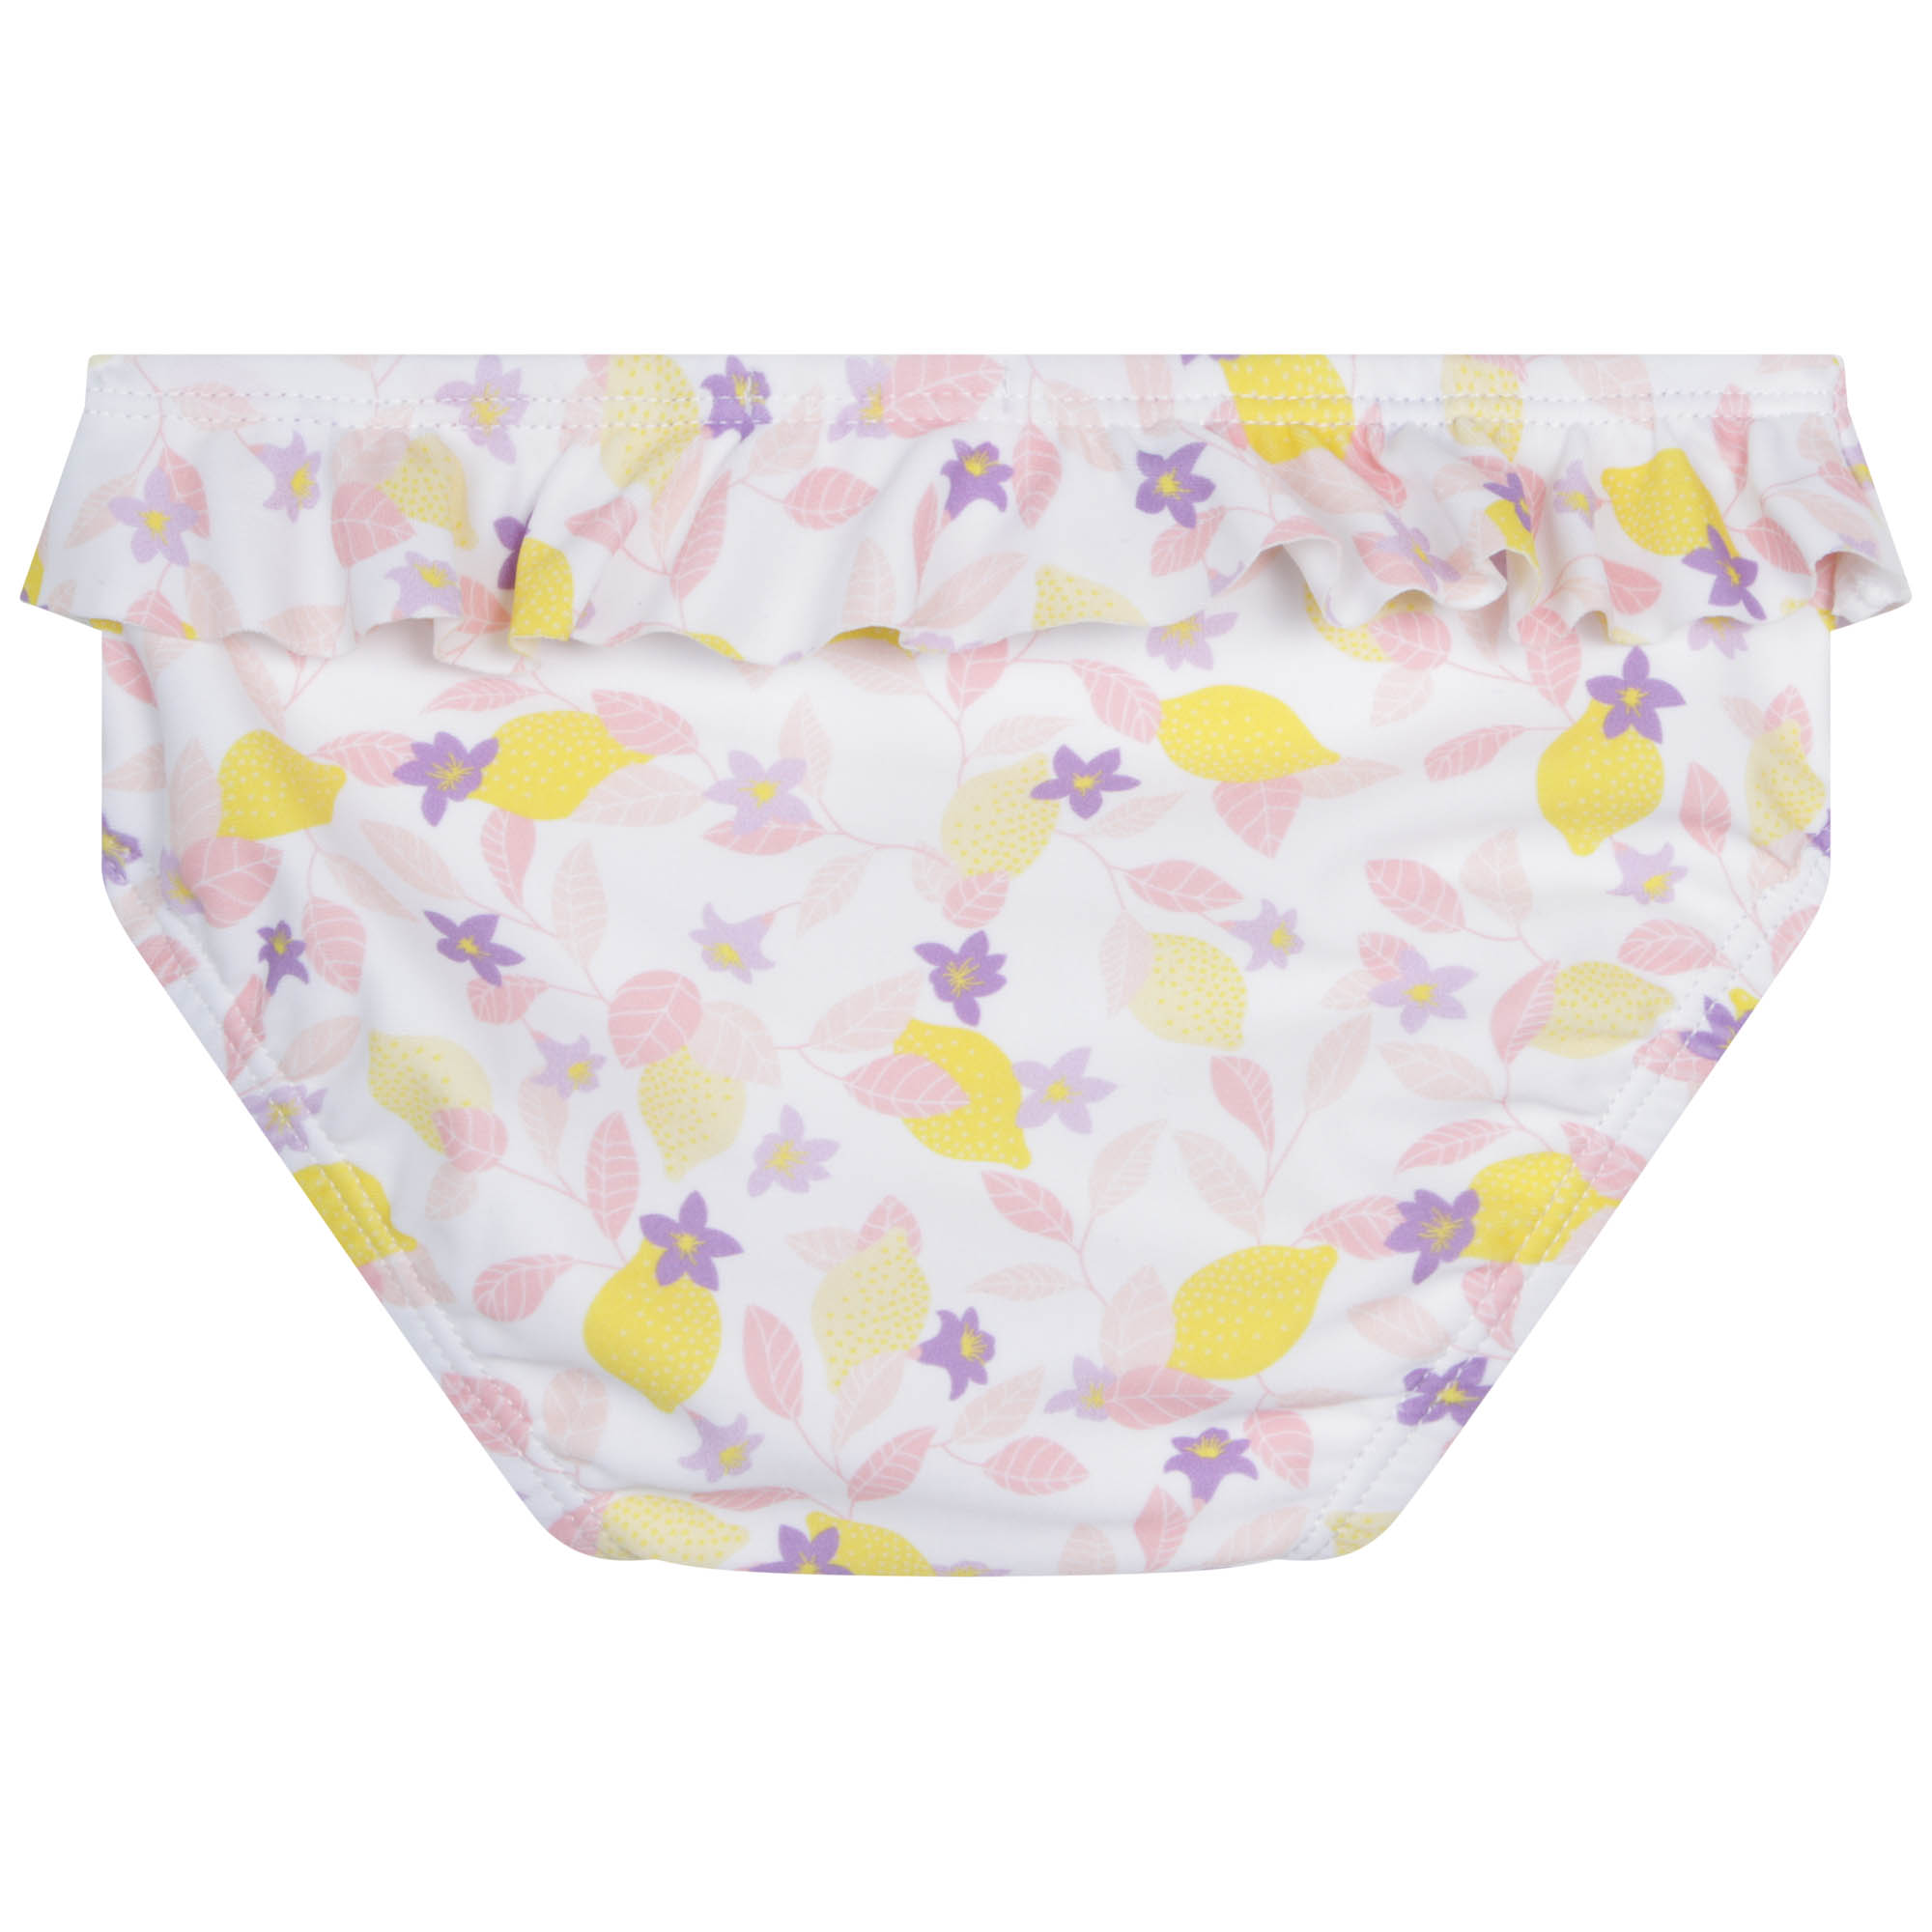 Patterned swimsuit bottoms CARREMENT BEAU for GIRL